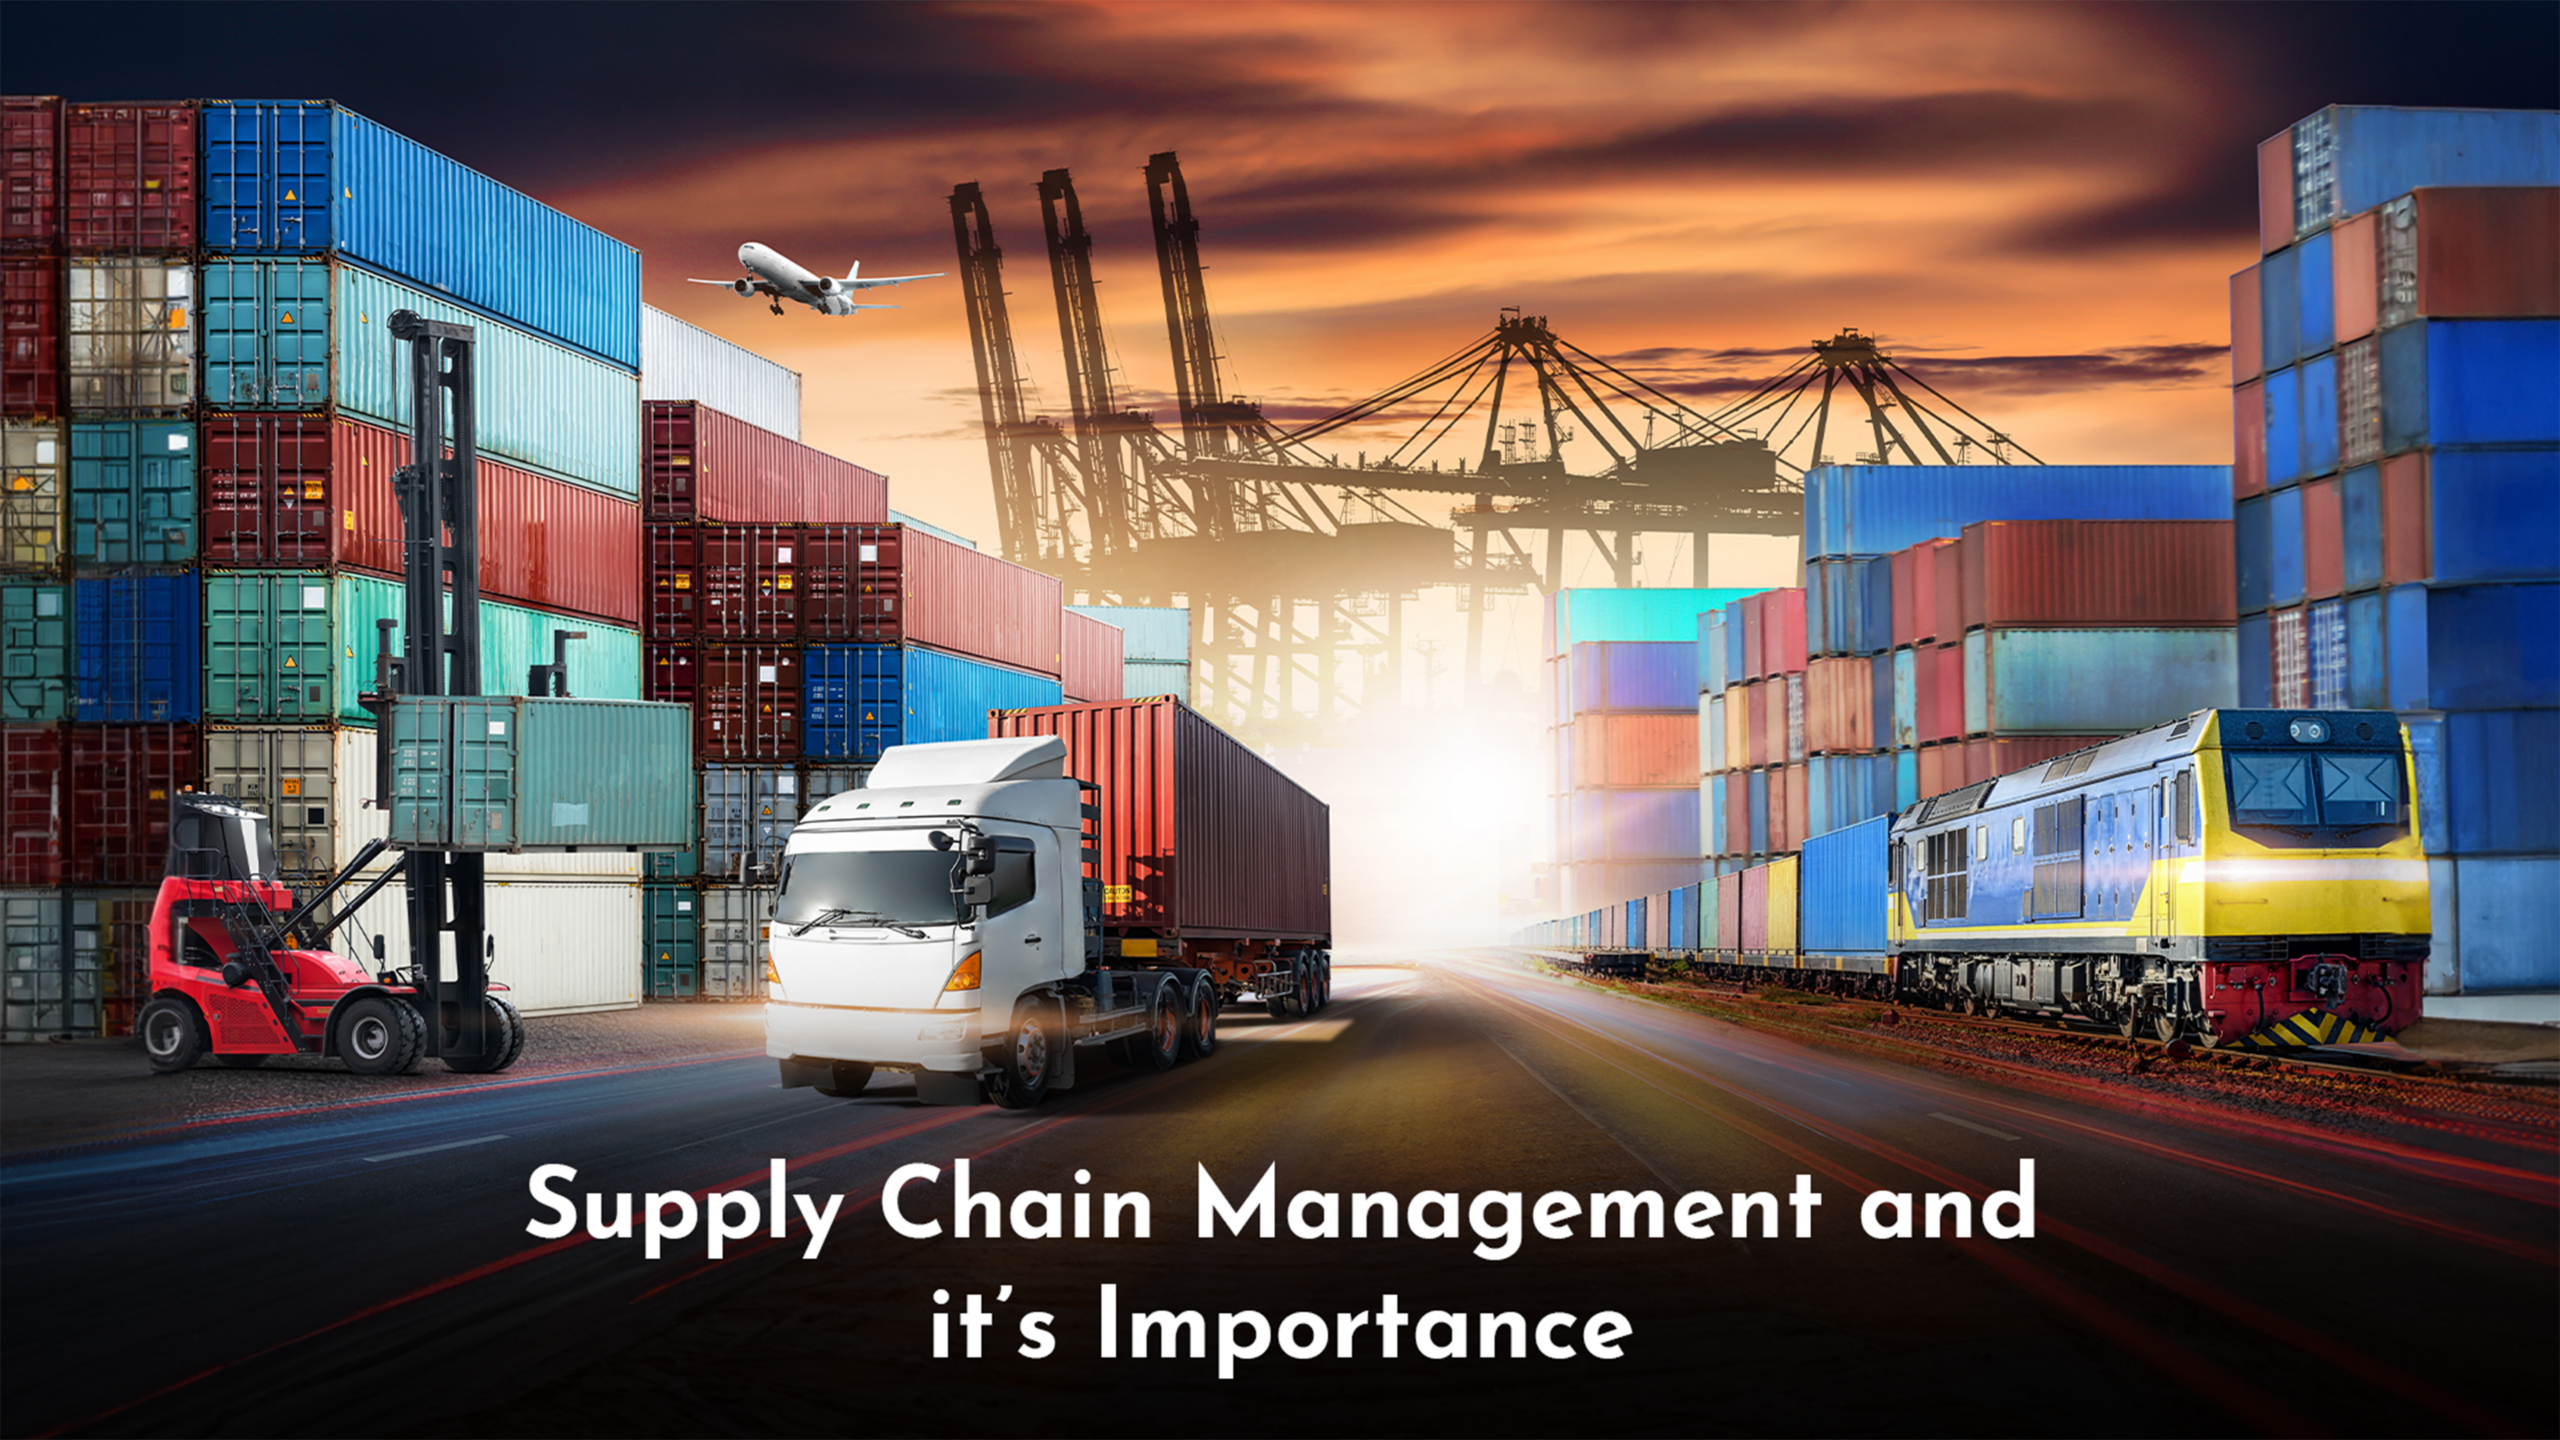 What is Supply Chain Management, and Why is it Important?